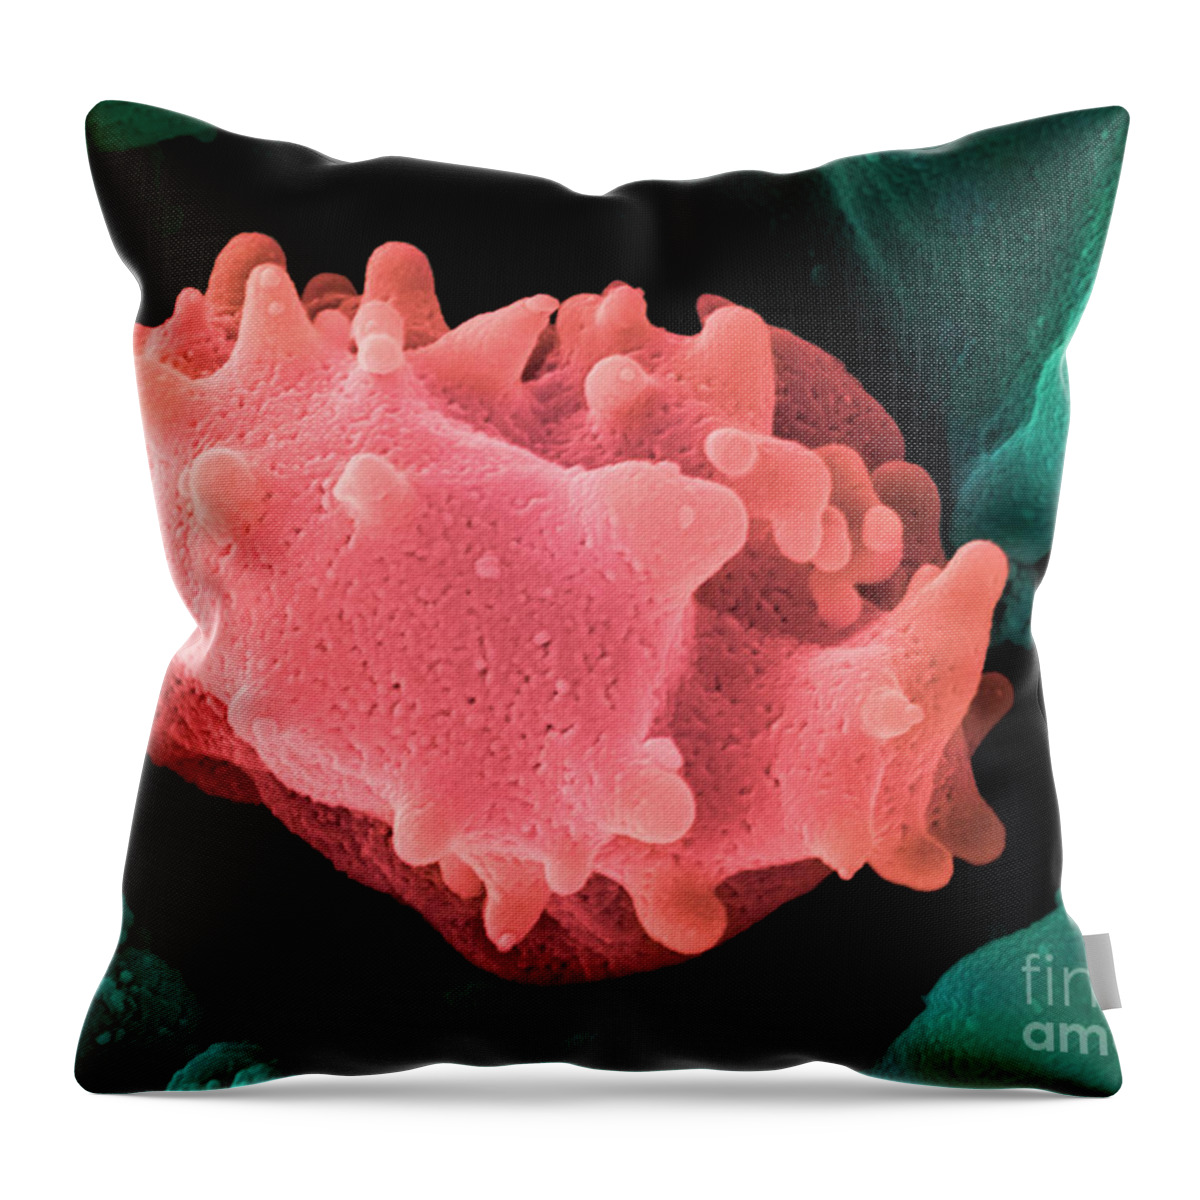 Lymphocyte Throw Pillow featuring the photograph Human Lymphocyte Cell, Sem #4 by Ted Kinsman